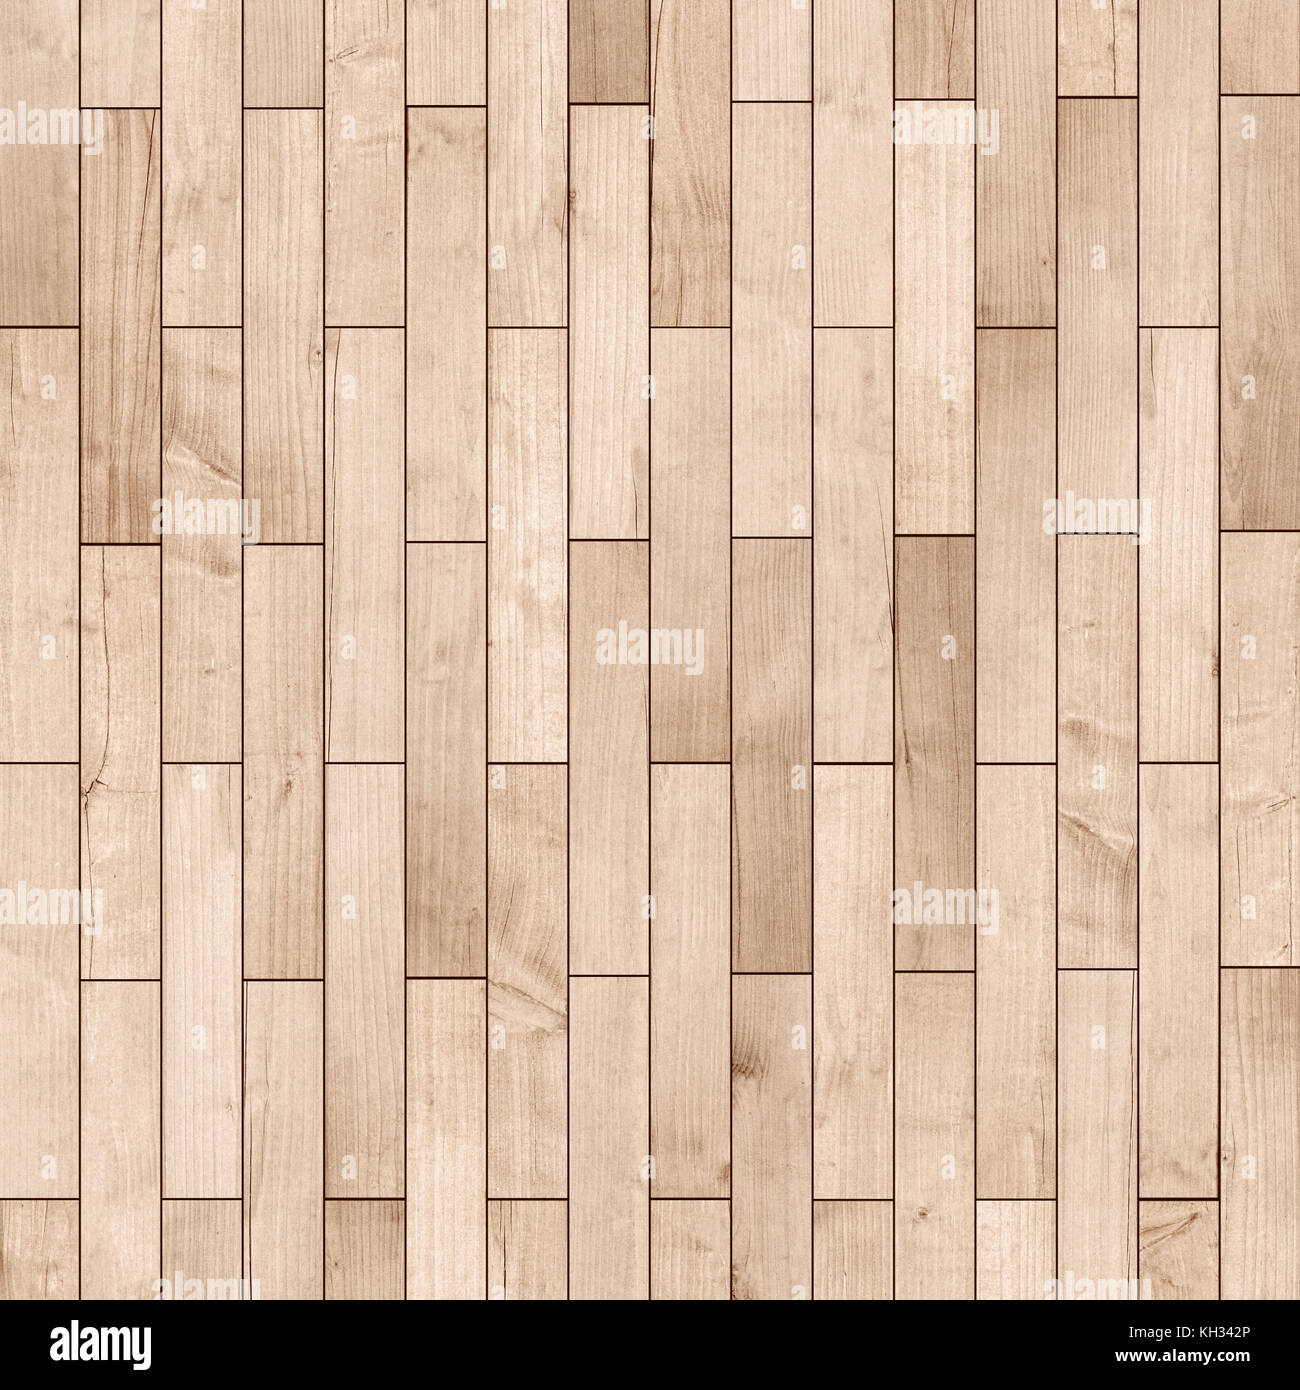 Brown wooden parquet, table, or floor surface. Verical wooden planks texture. Stock Photo